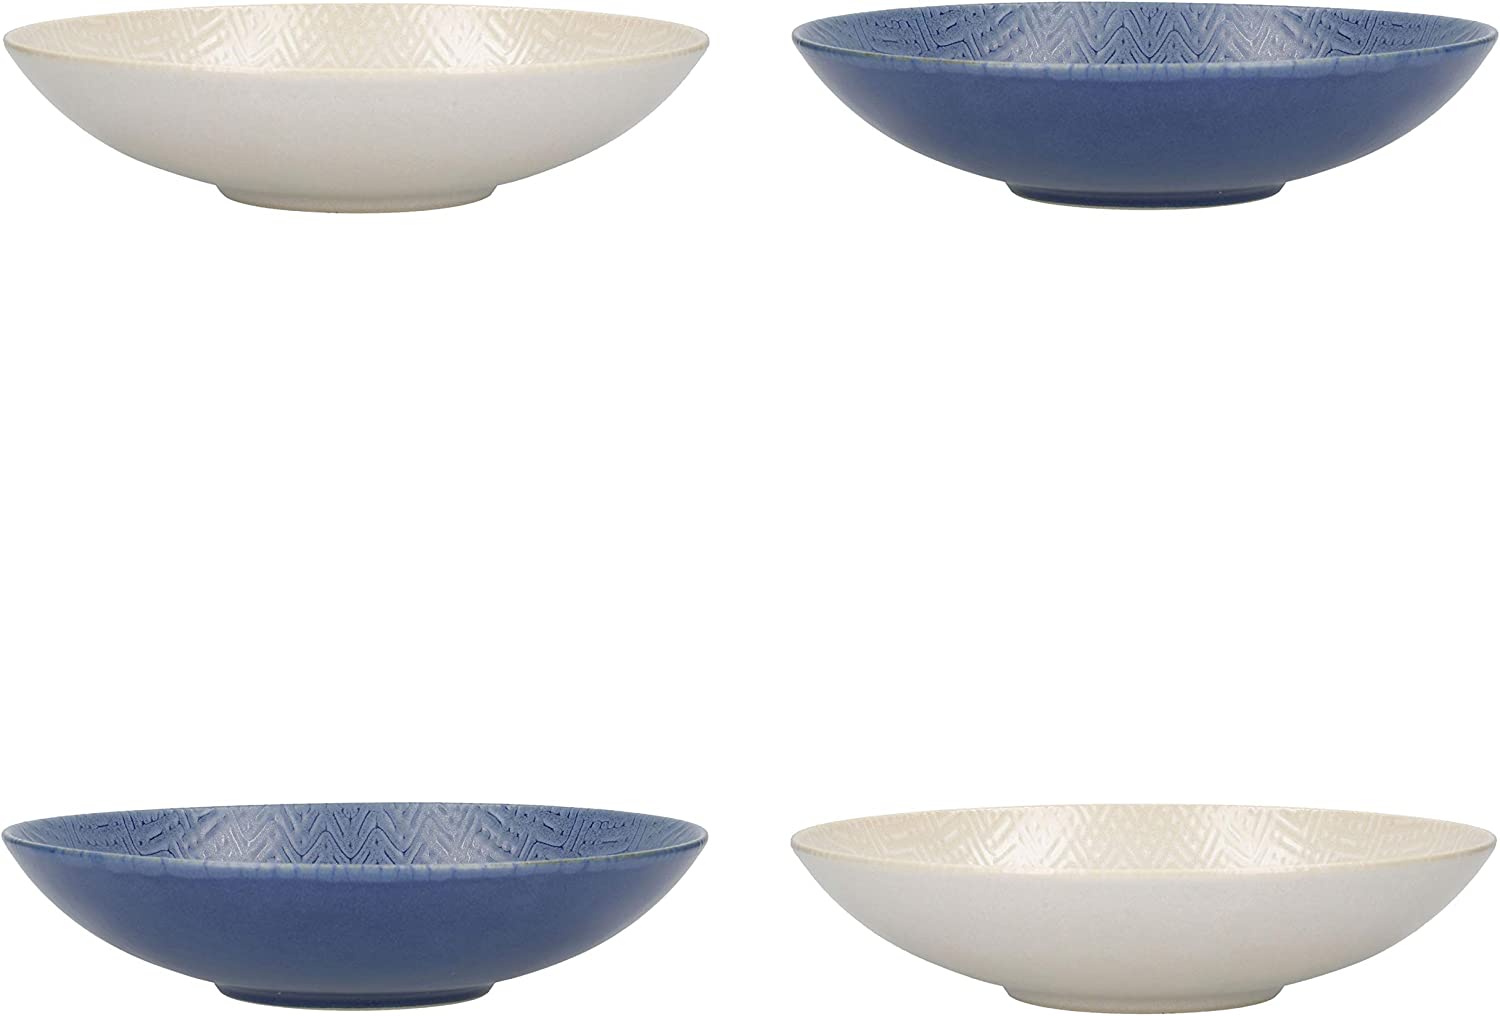 KC BLUE KitchenCraft Pasta Bowls Set of 4 in Gift Box, Ideal for Ramen and Rice, Lead-Free Glazed Stoneware, Embossed Blue/Cream, 22 cm